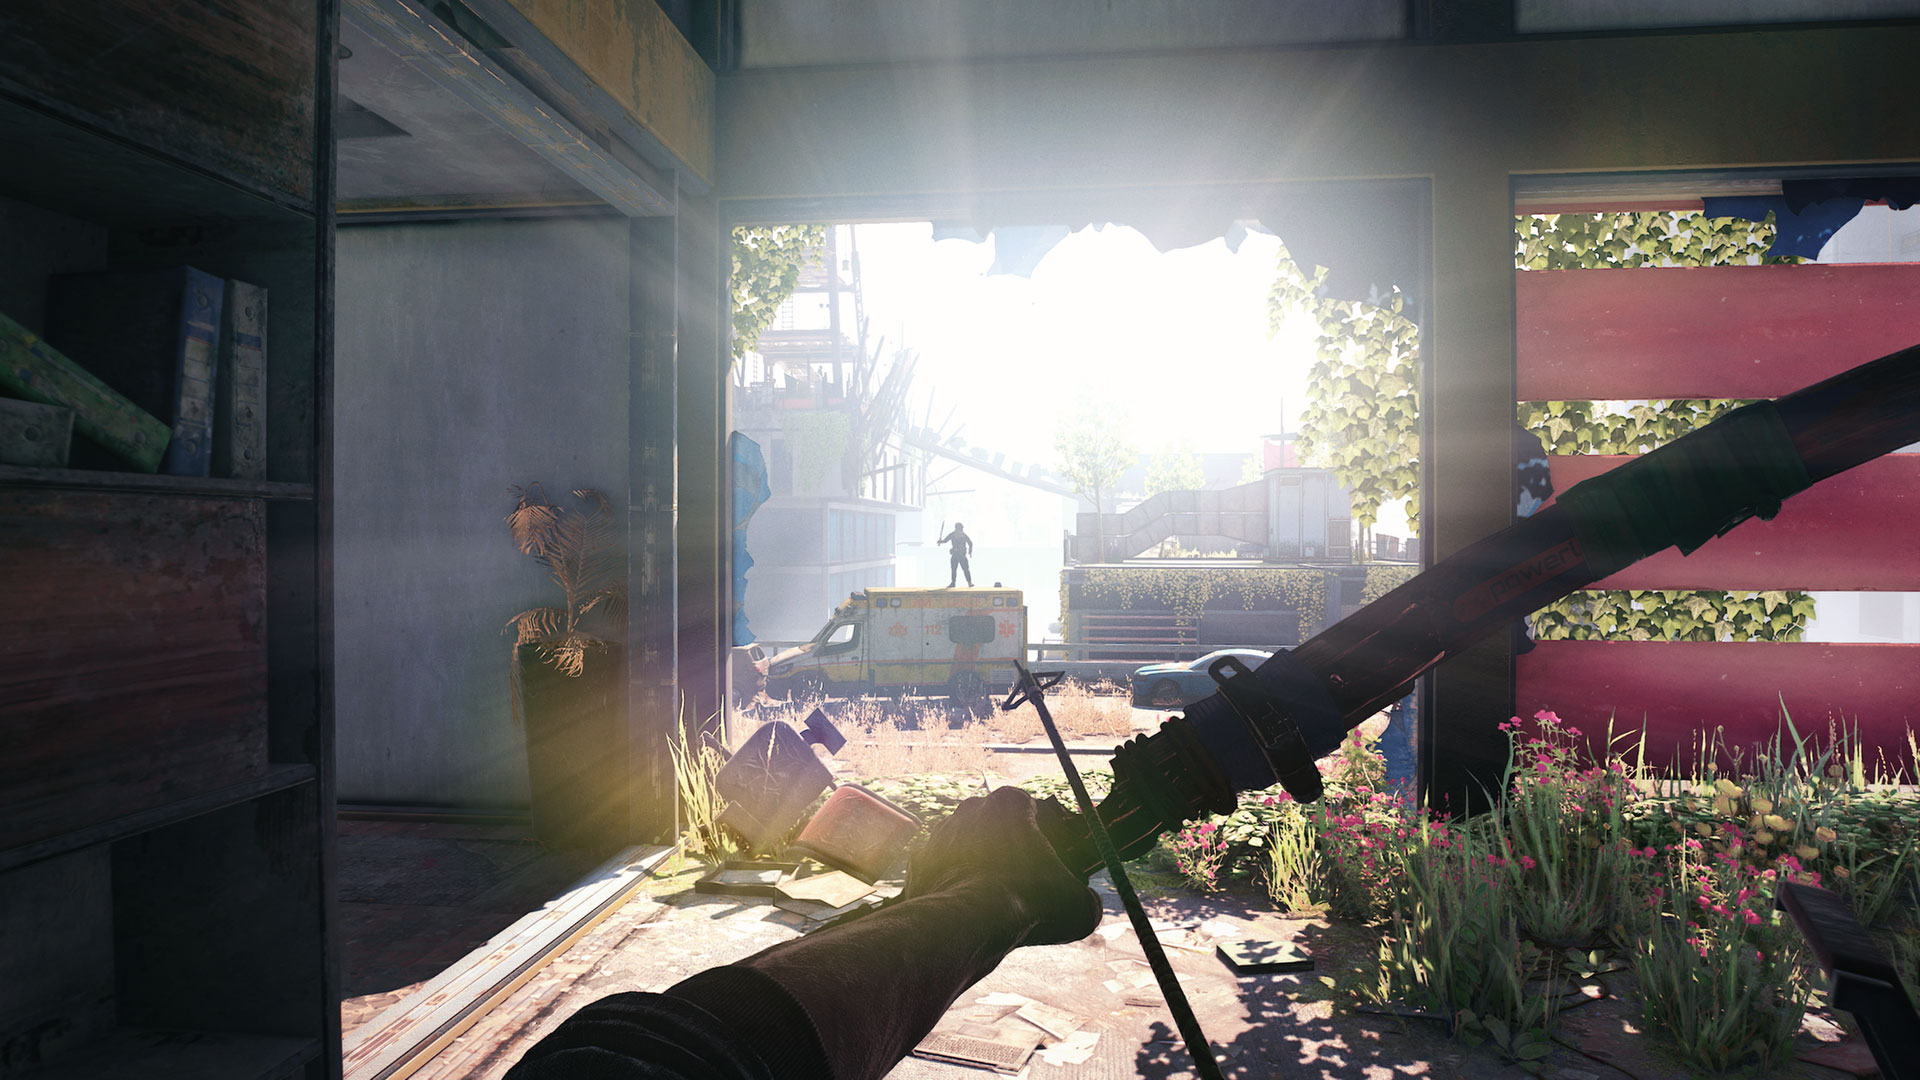 10 facts about Dying Light 2 that you must know